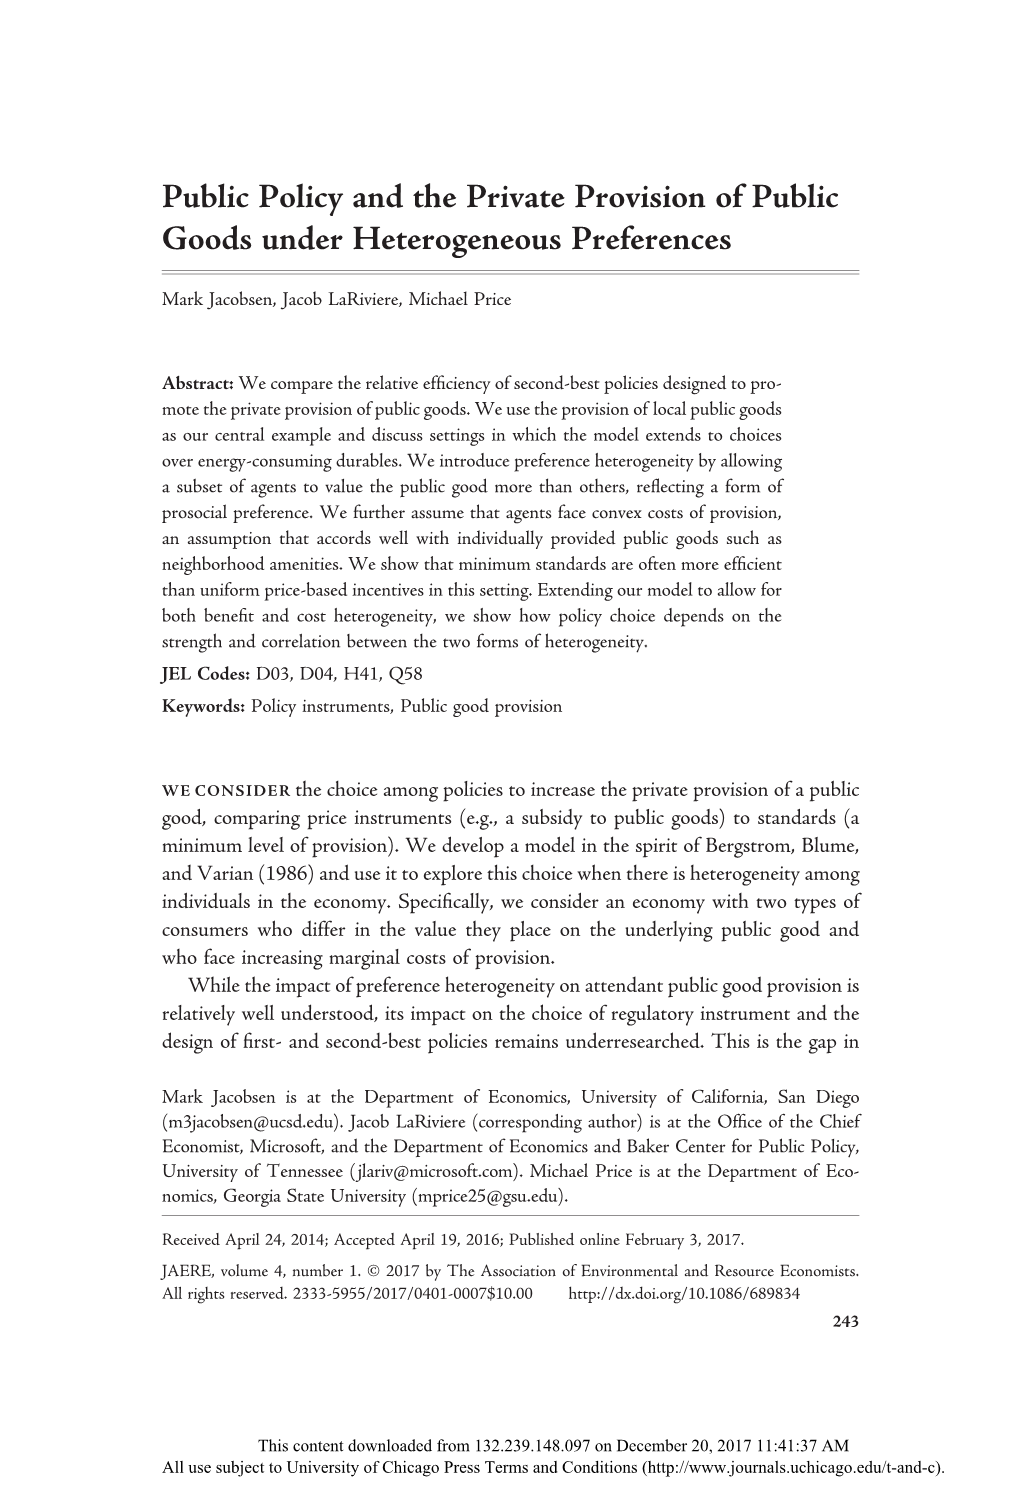 Public Policy and the Private Provision of Public Goods Under Heterogeneous Preferences